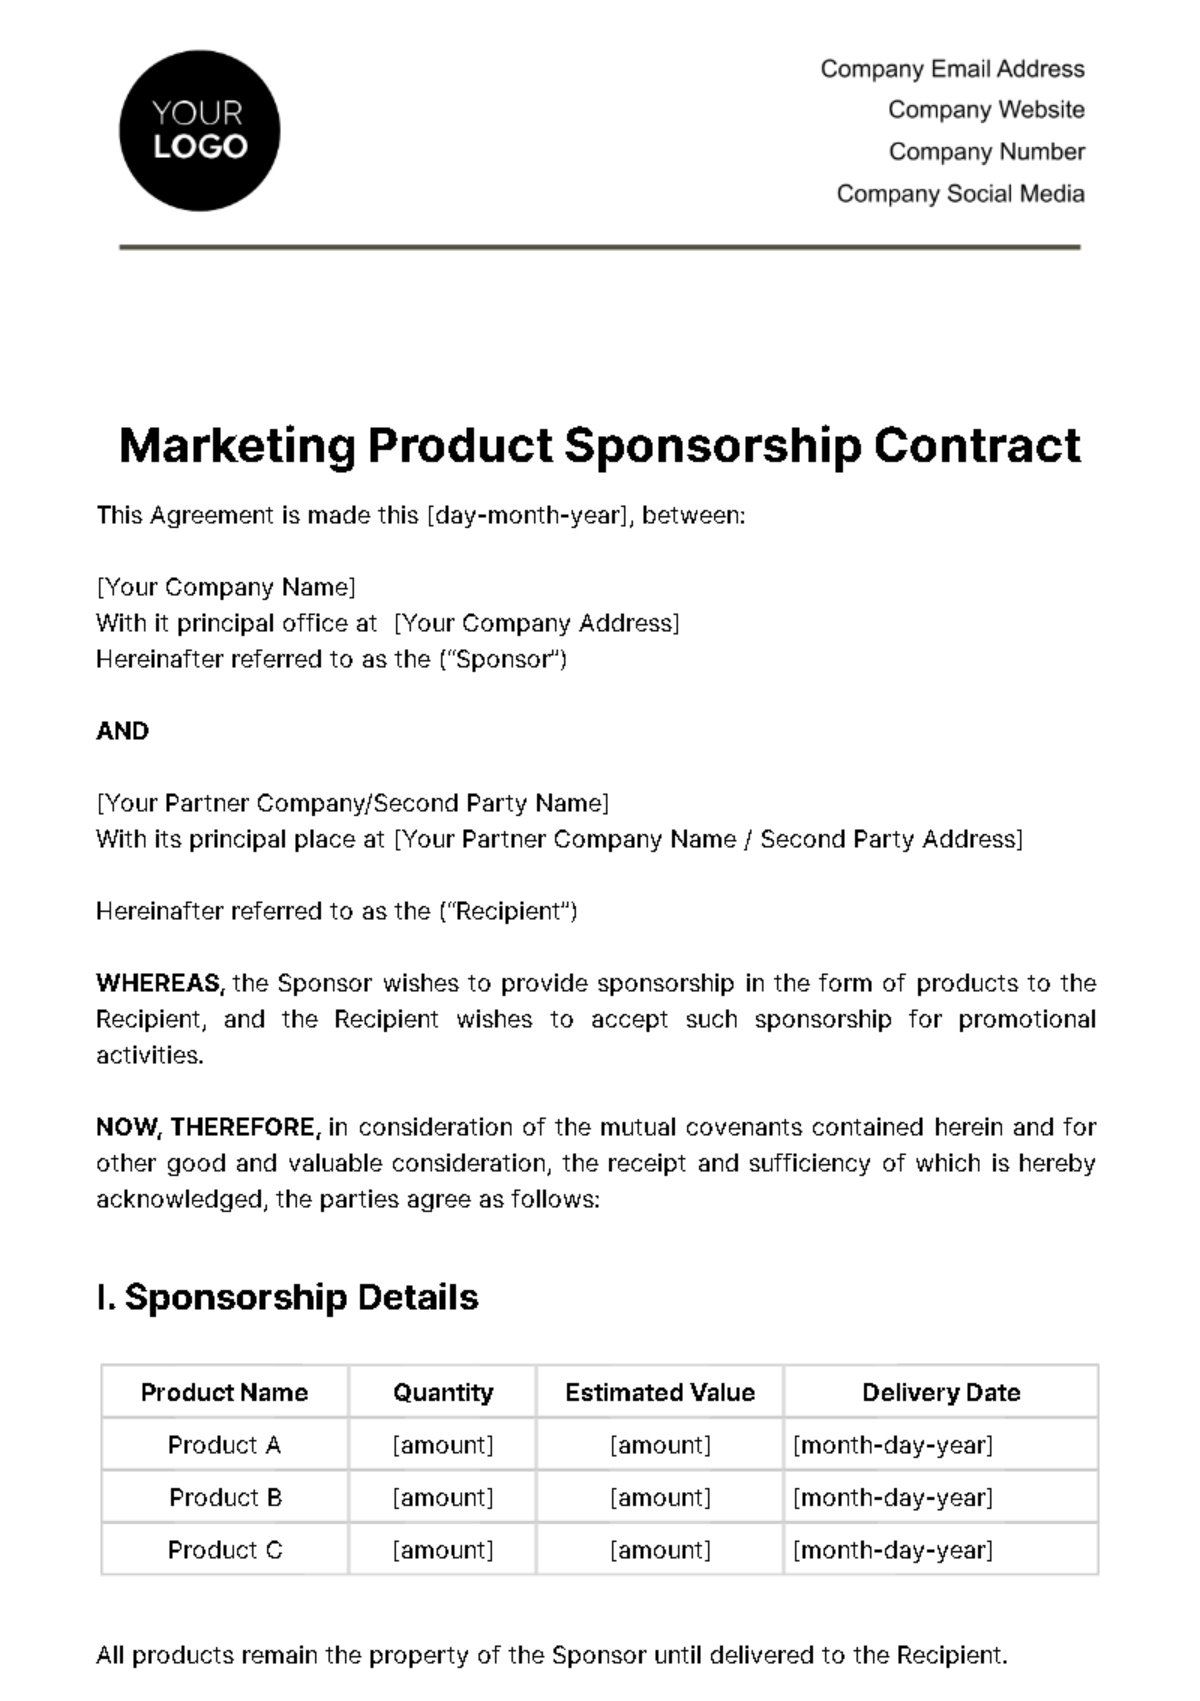 Free Marketing Product Sponsorship Contract Template